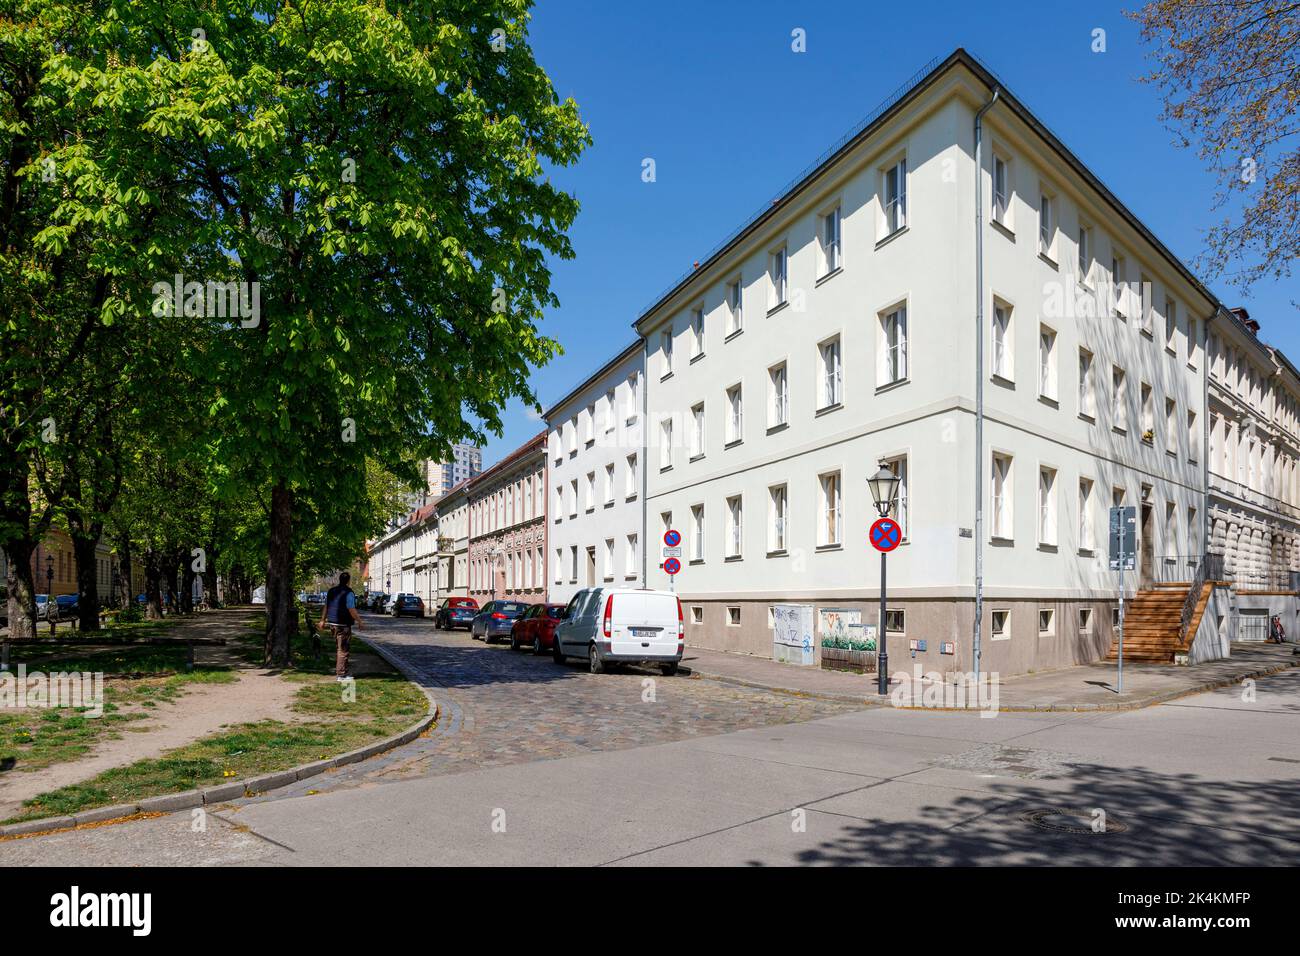 Residential area in downtown Potsdam on Dortusstrasse Stock Photo